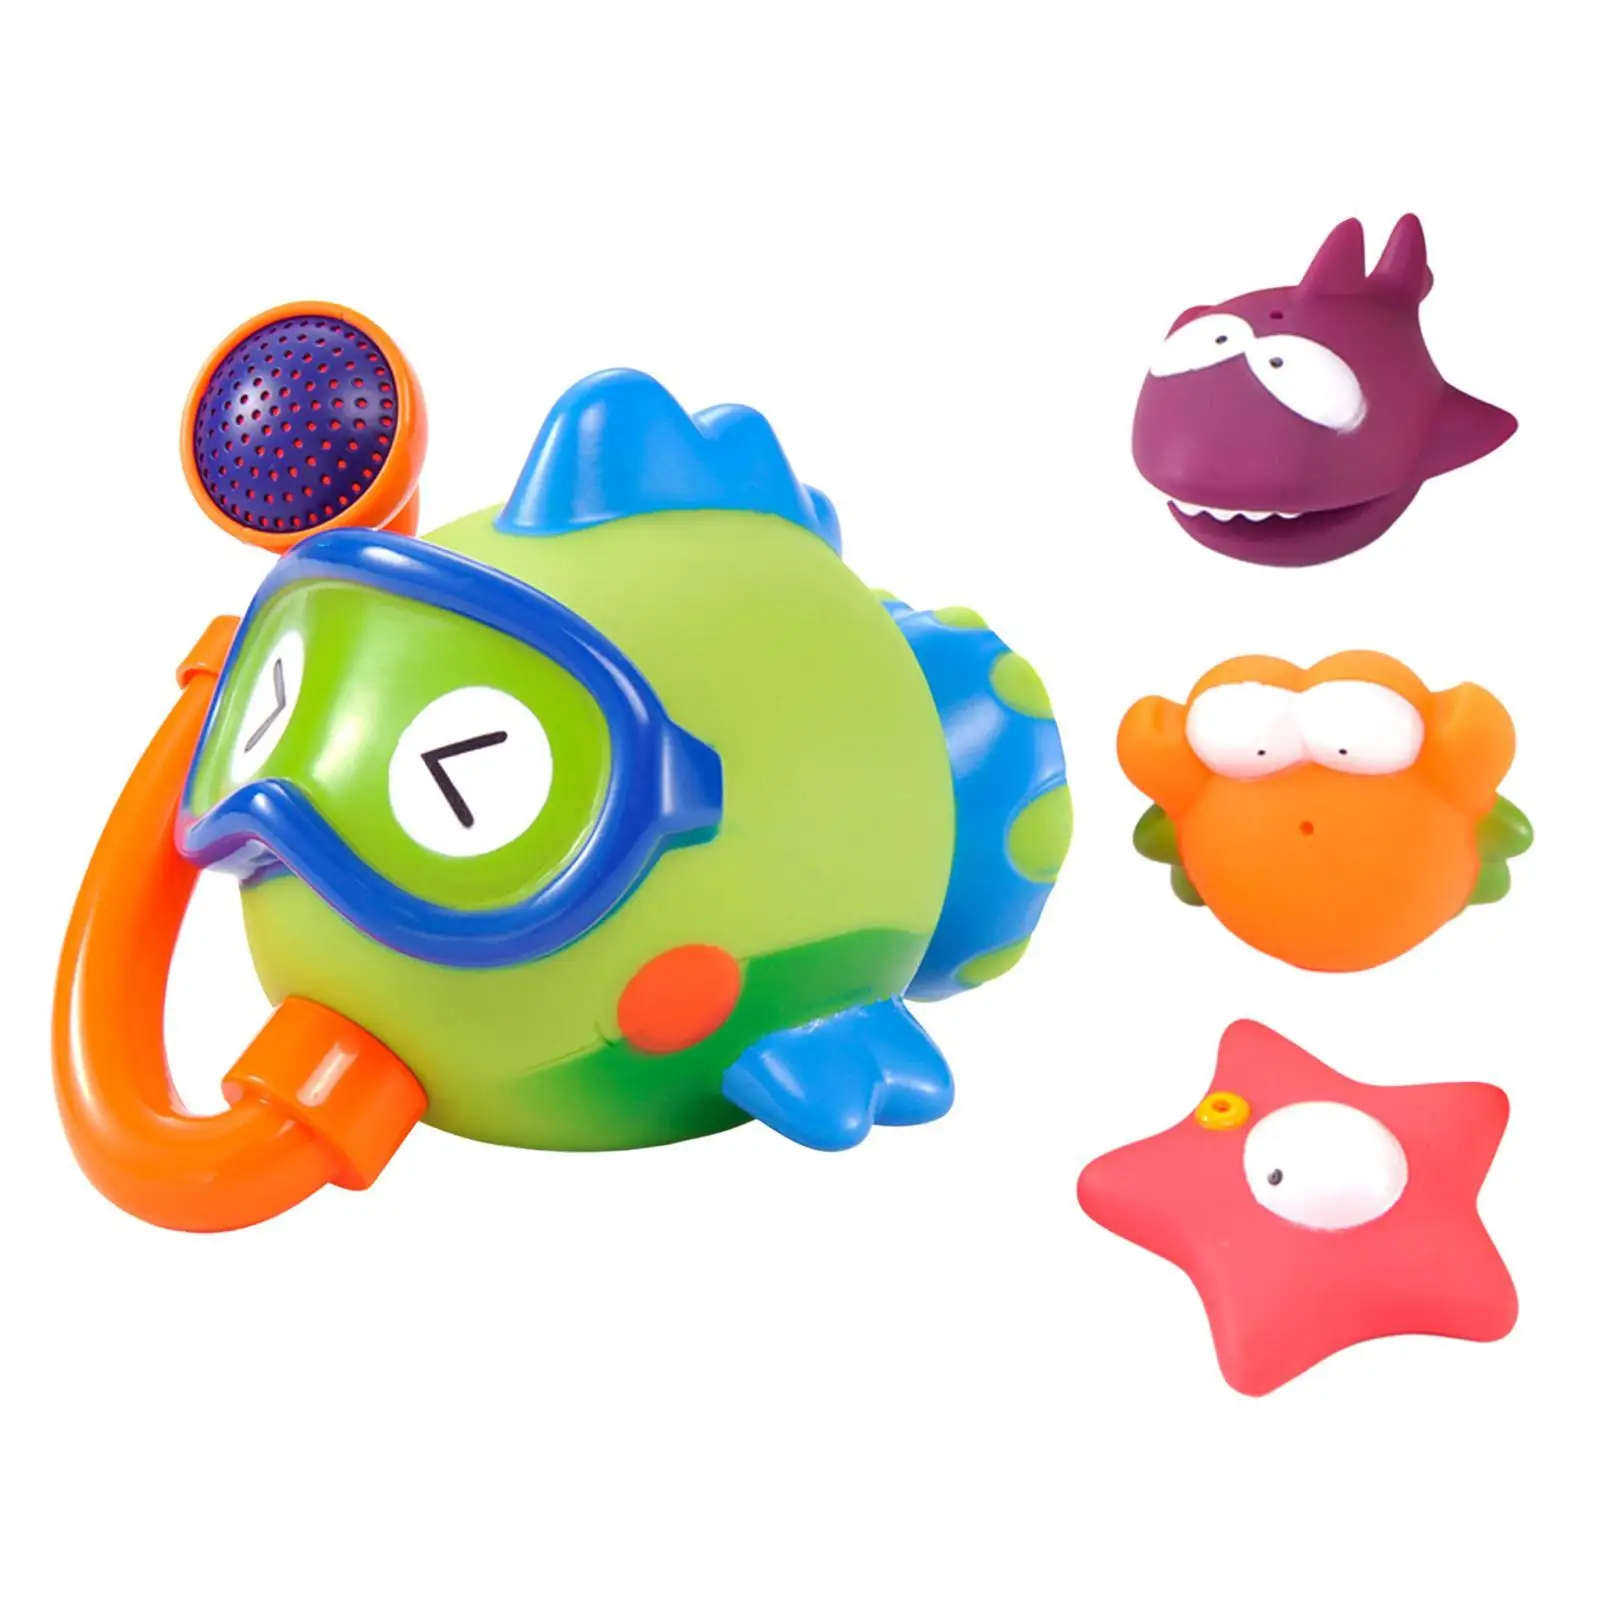 4Pcs Ocean Sea Animal Bathtub Toys Toddlers Bath Shower Toys Water Game for Toddlers Kids Girls Boys Infants Birthday Gifts